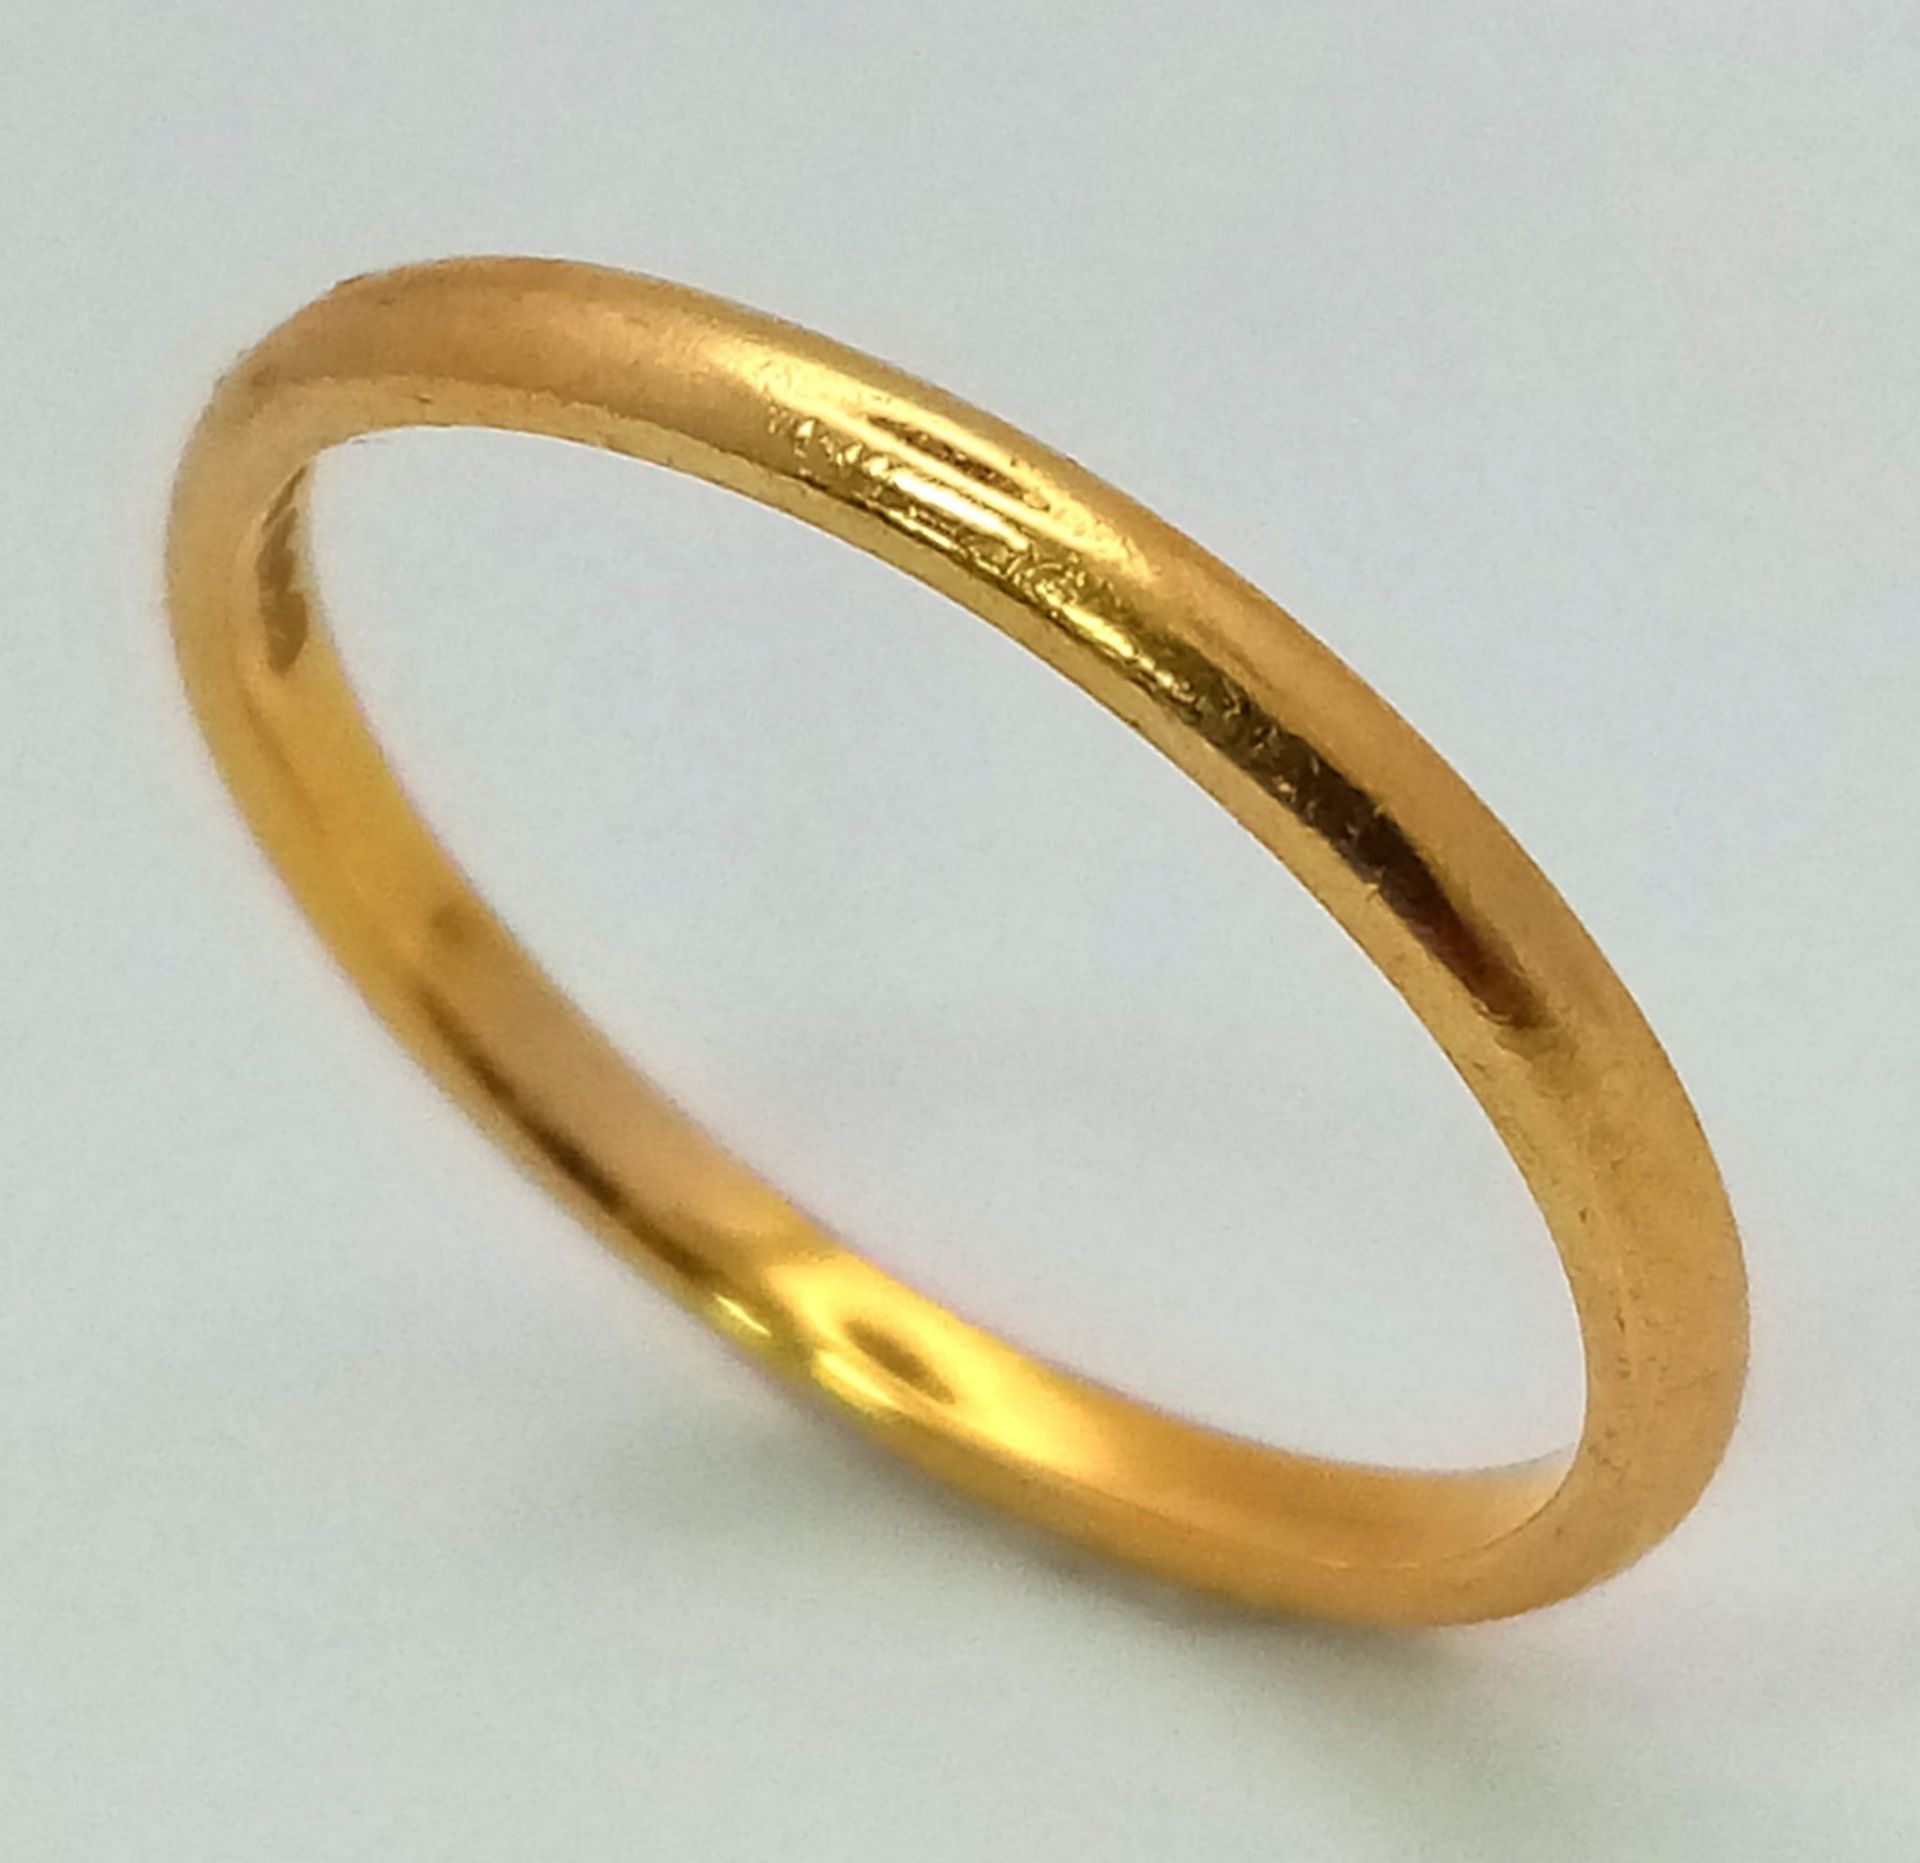 A Vintage 22K Yellow Gold Thin Band Ring. Size M. 1.84g